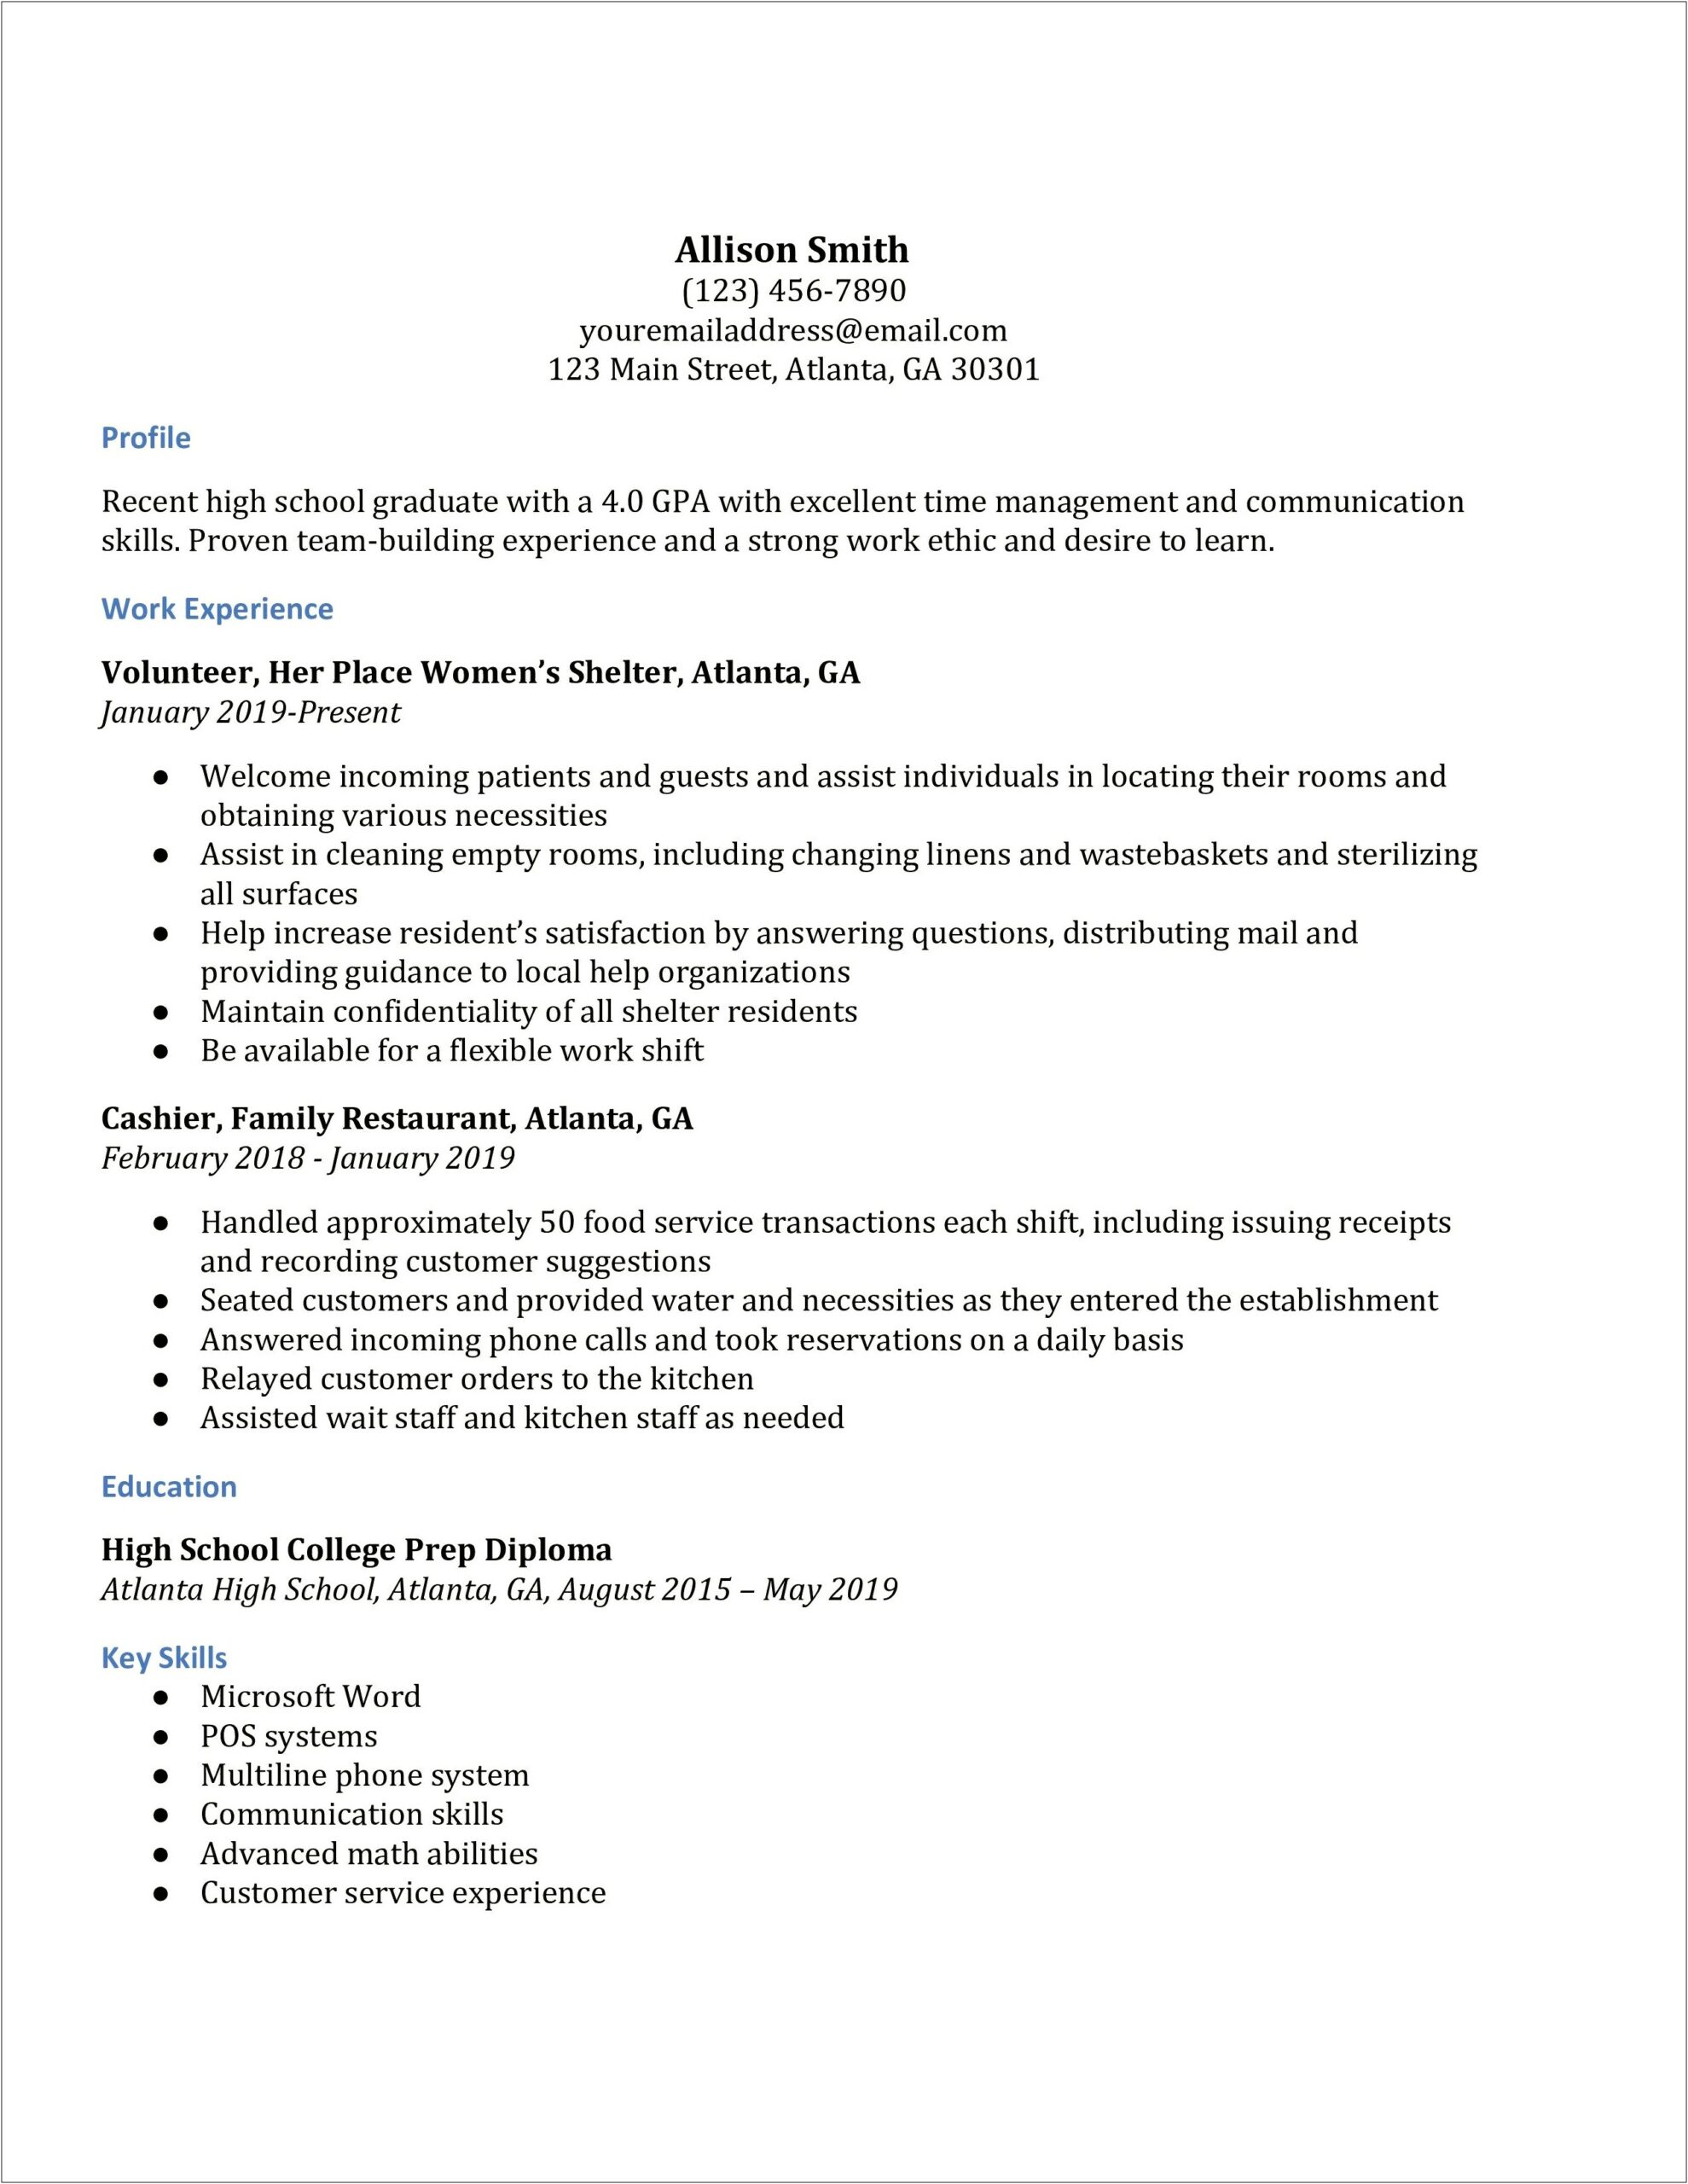 Resume Example With Recent And Previous Work Experience